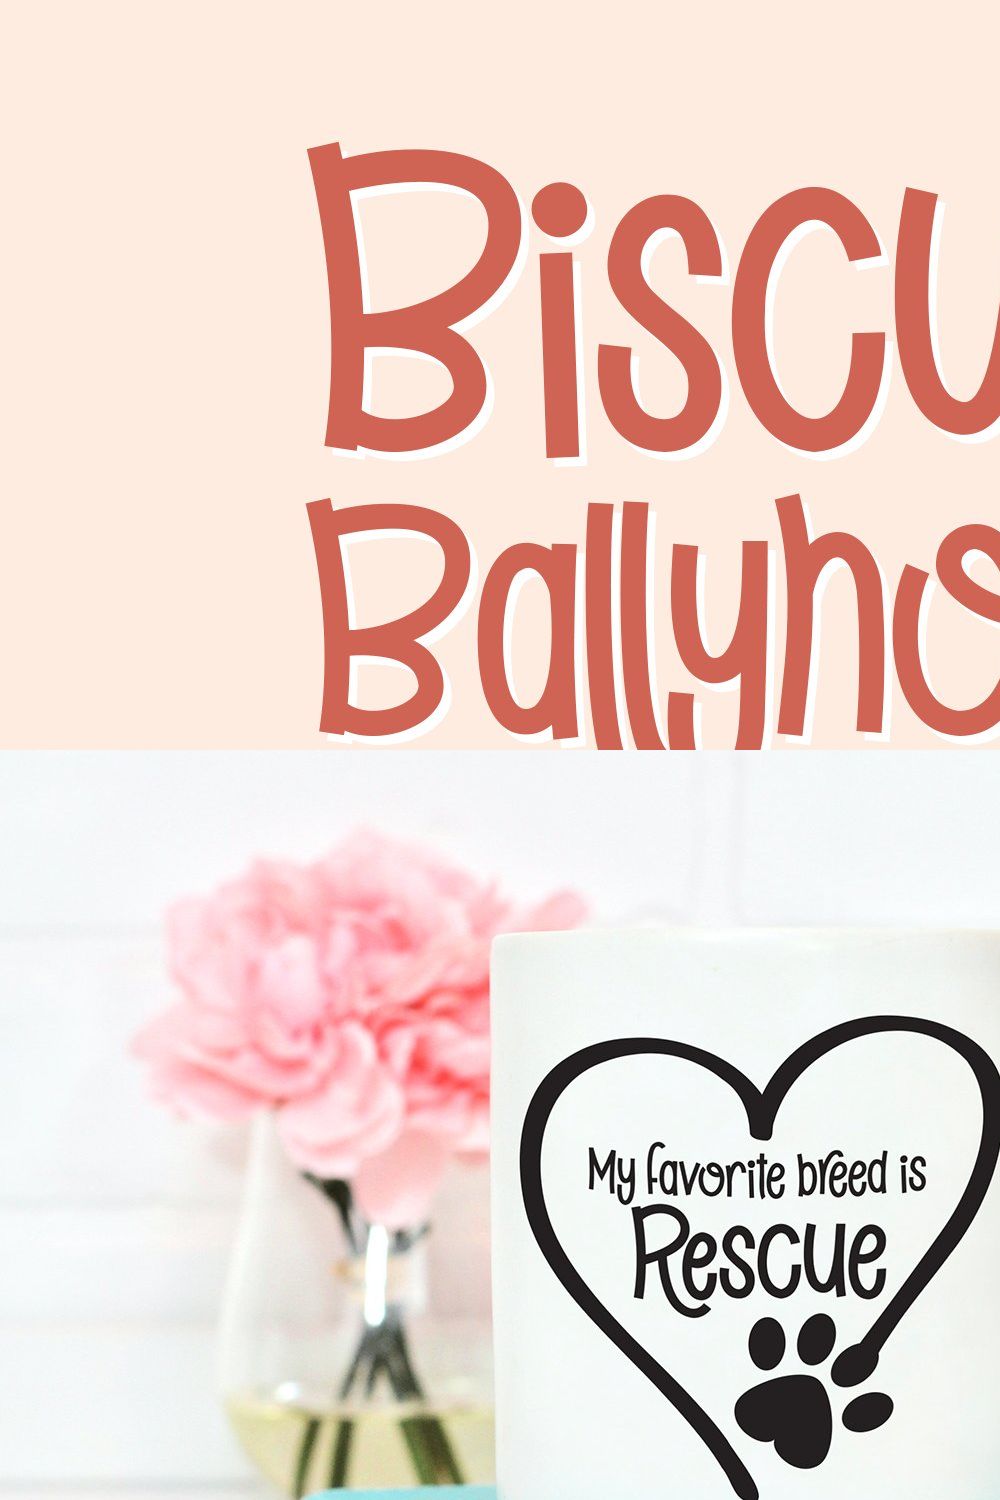 Biscuit Ballyhoo a quirky sans font pinterest preview image.